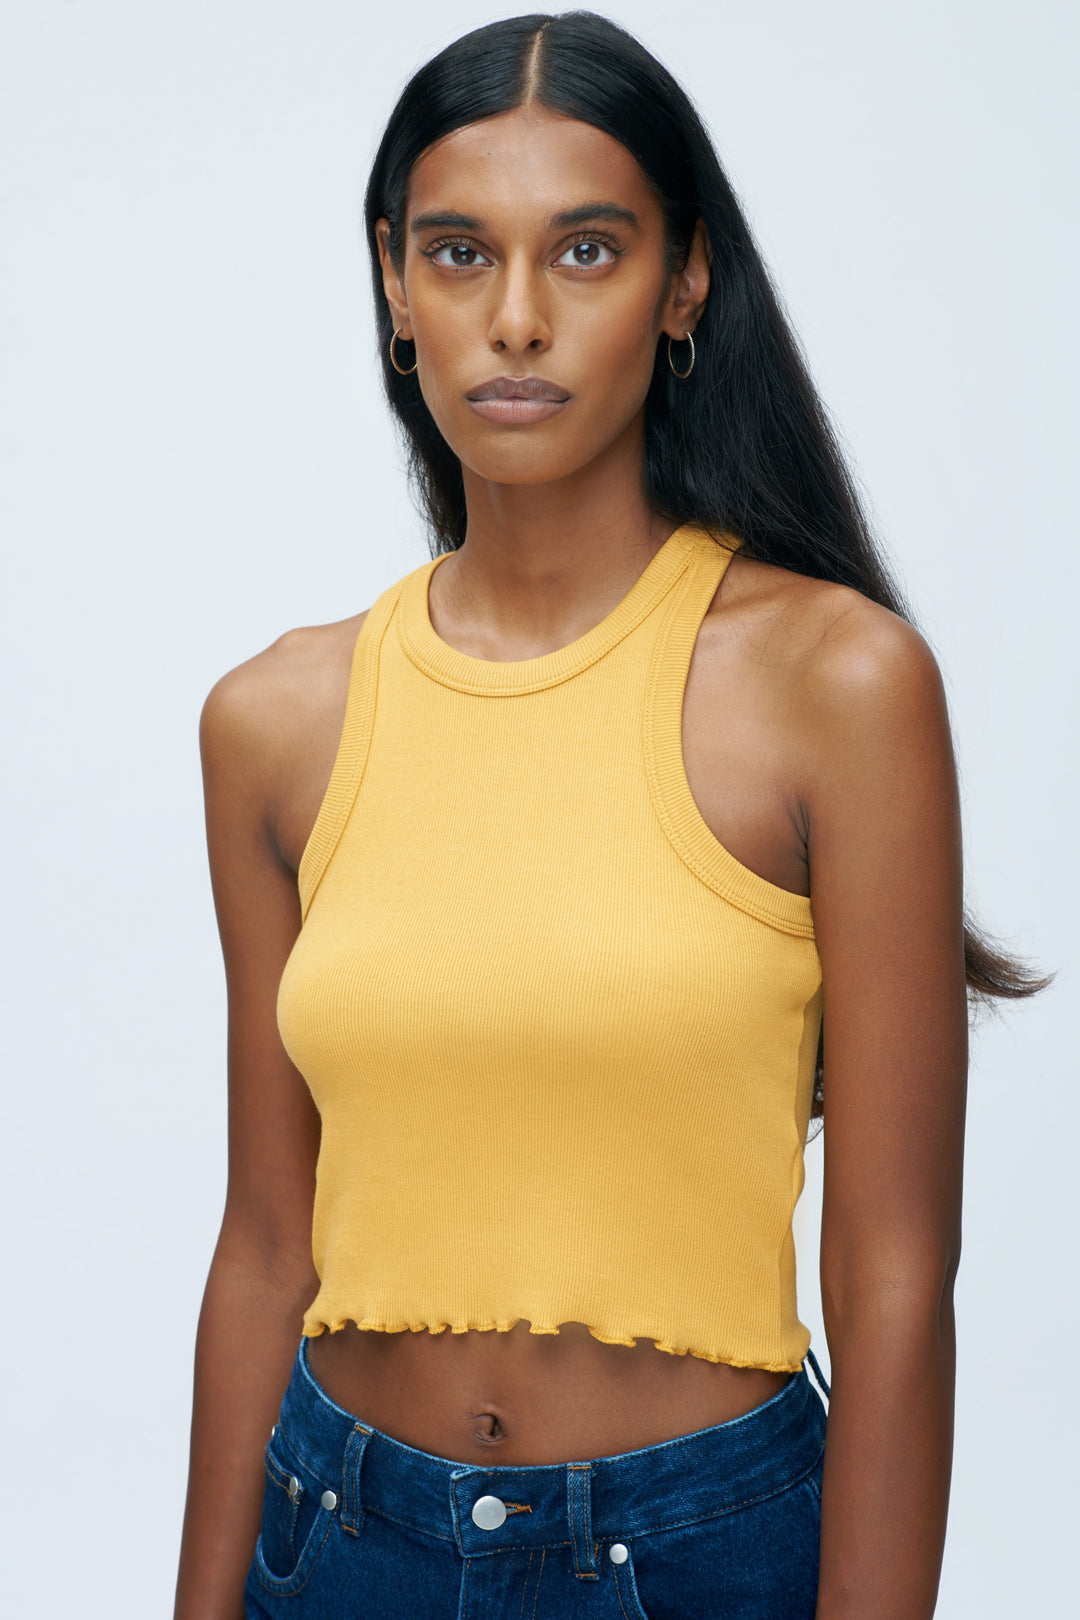 A lady wears a mustard colored fitted crop top by fair trade fashion brand KOTN.